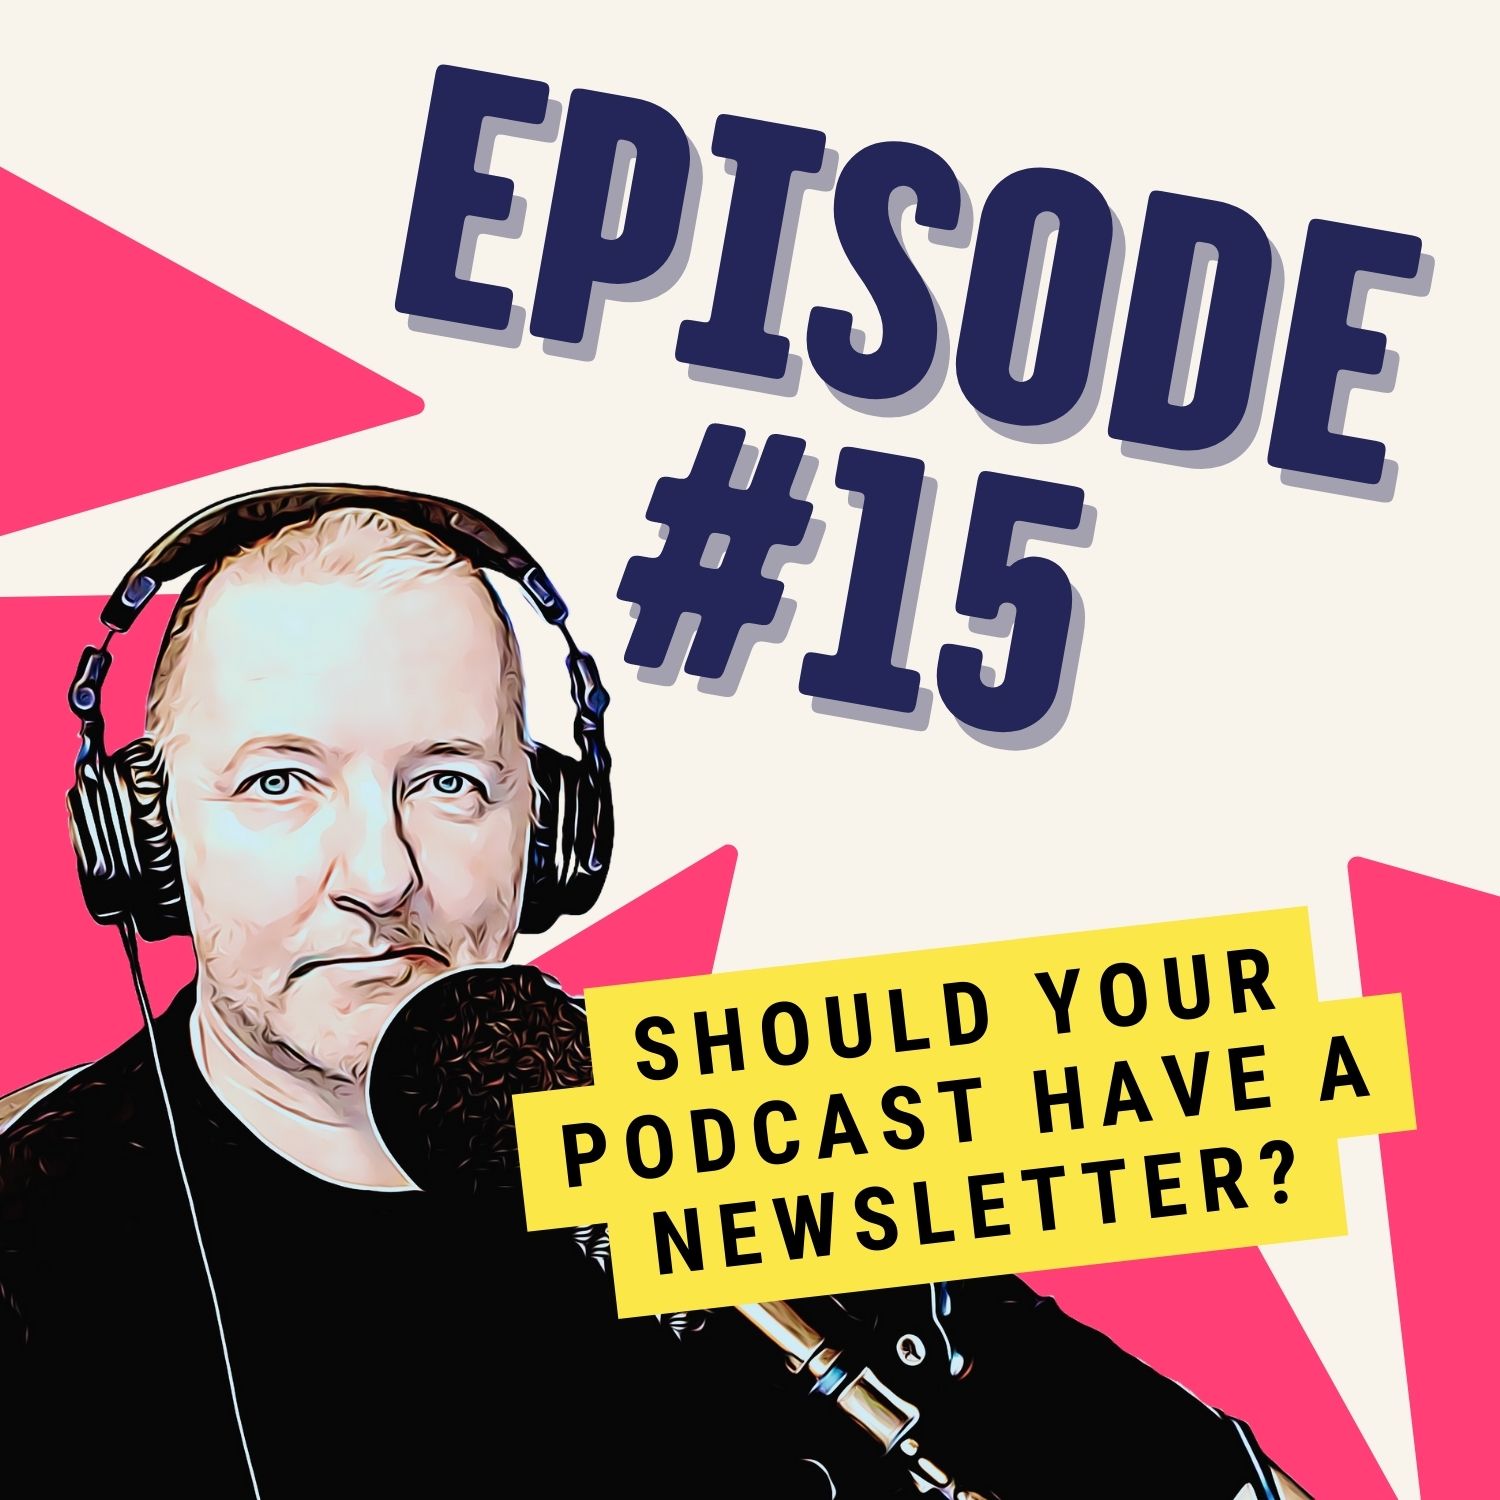 Should Your Podcast Have a Newsletter?